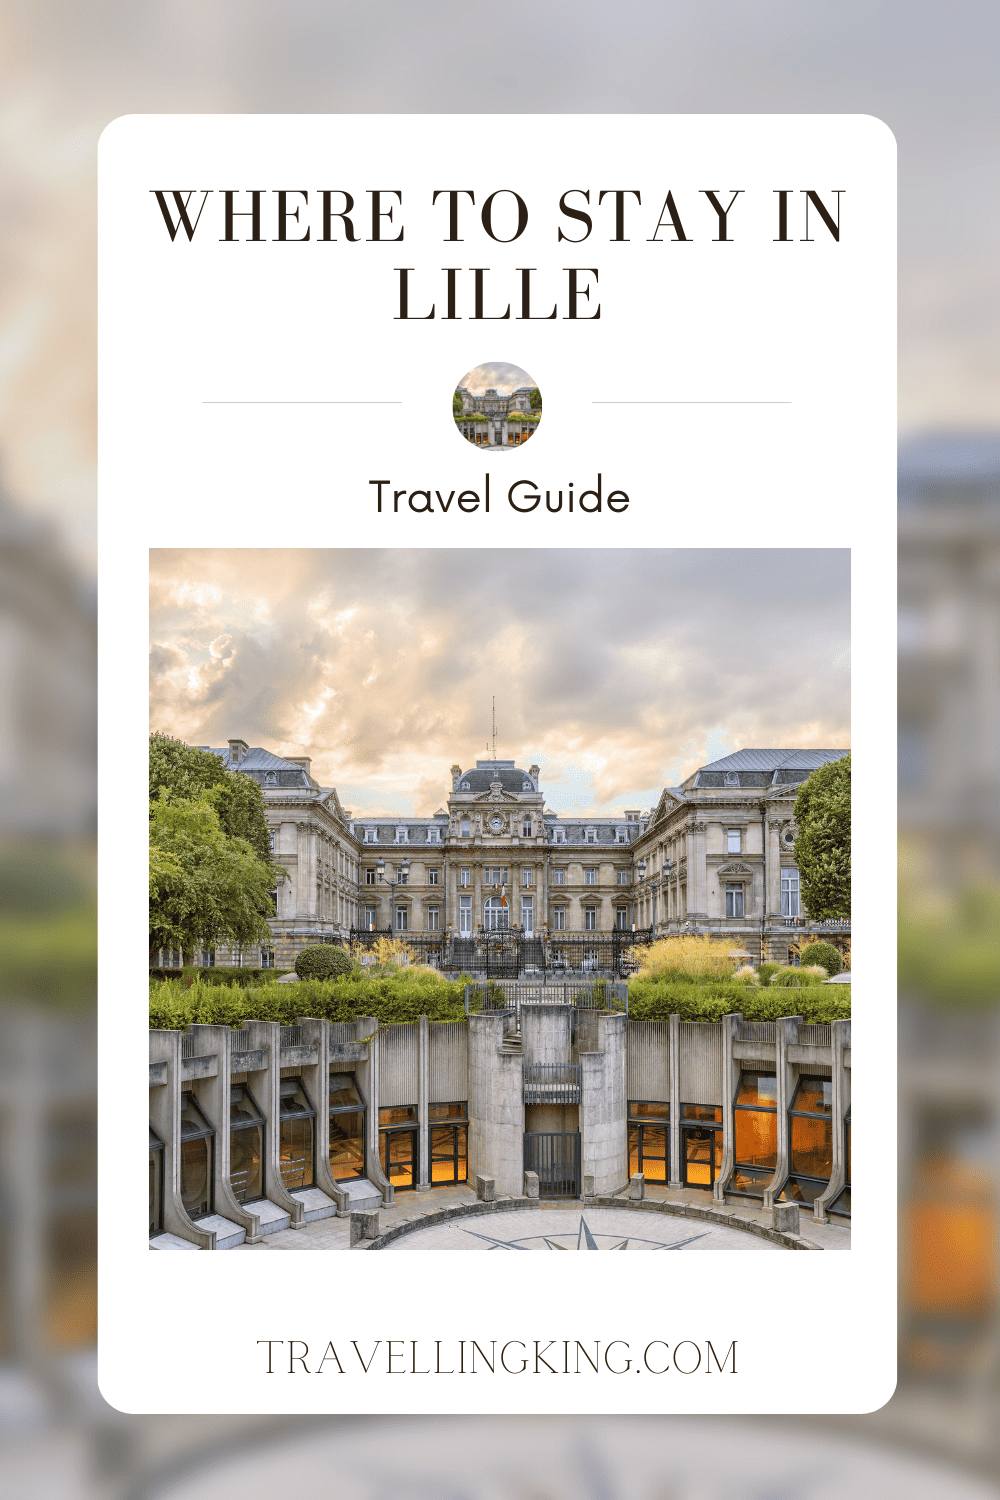 Where to stay in Lille